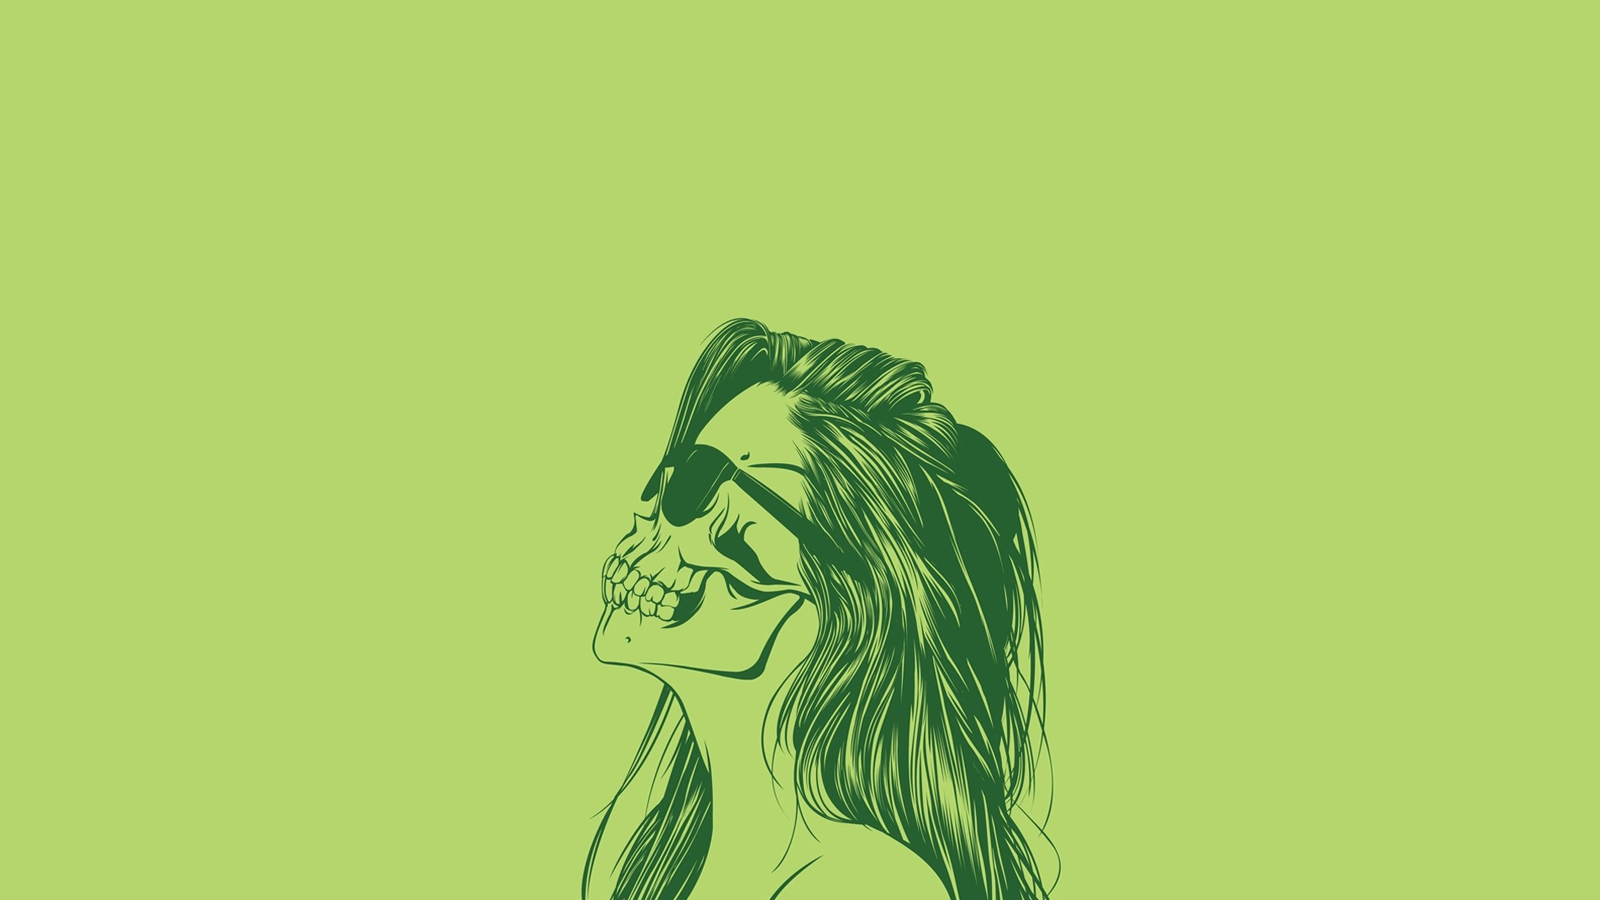 General 1600x900 skull simple background women artwork women with shades long hair green green background sunglasses